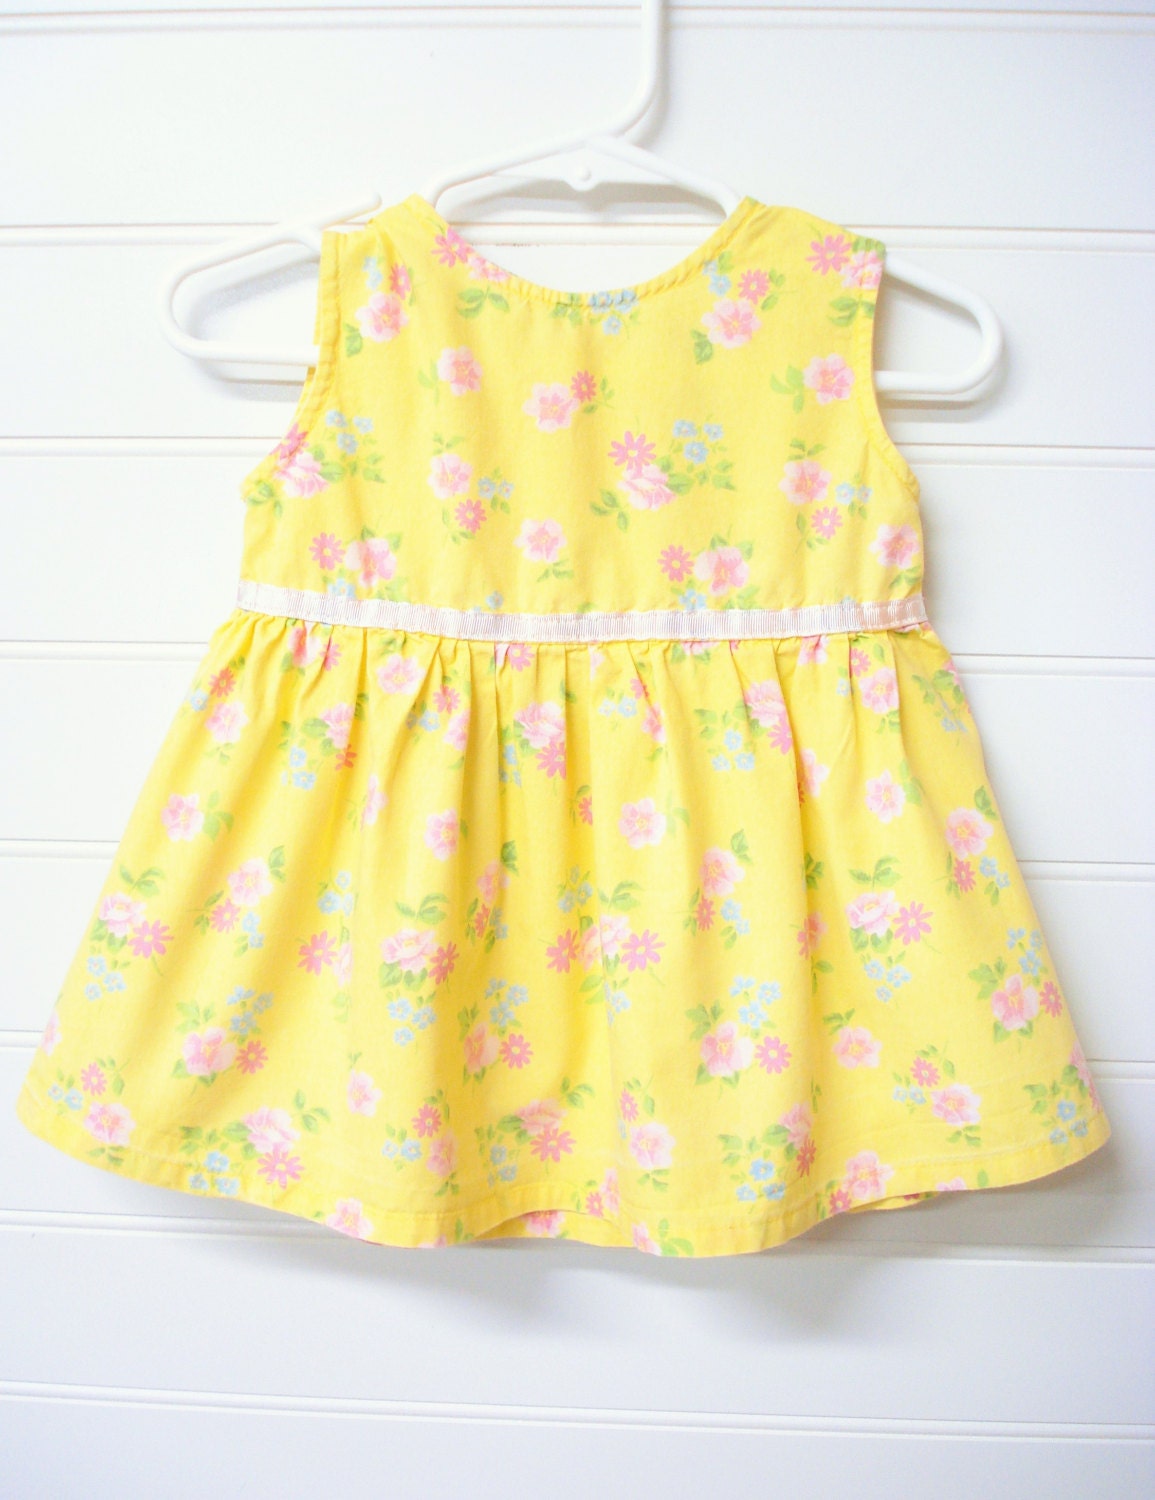 Vintage Baby Clothes Baby Girl Dress in Yellow With Pink and